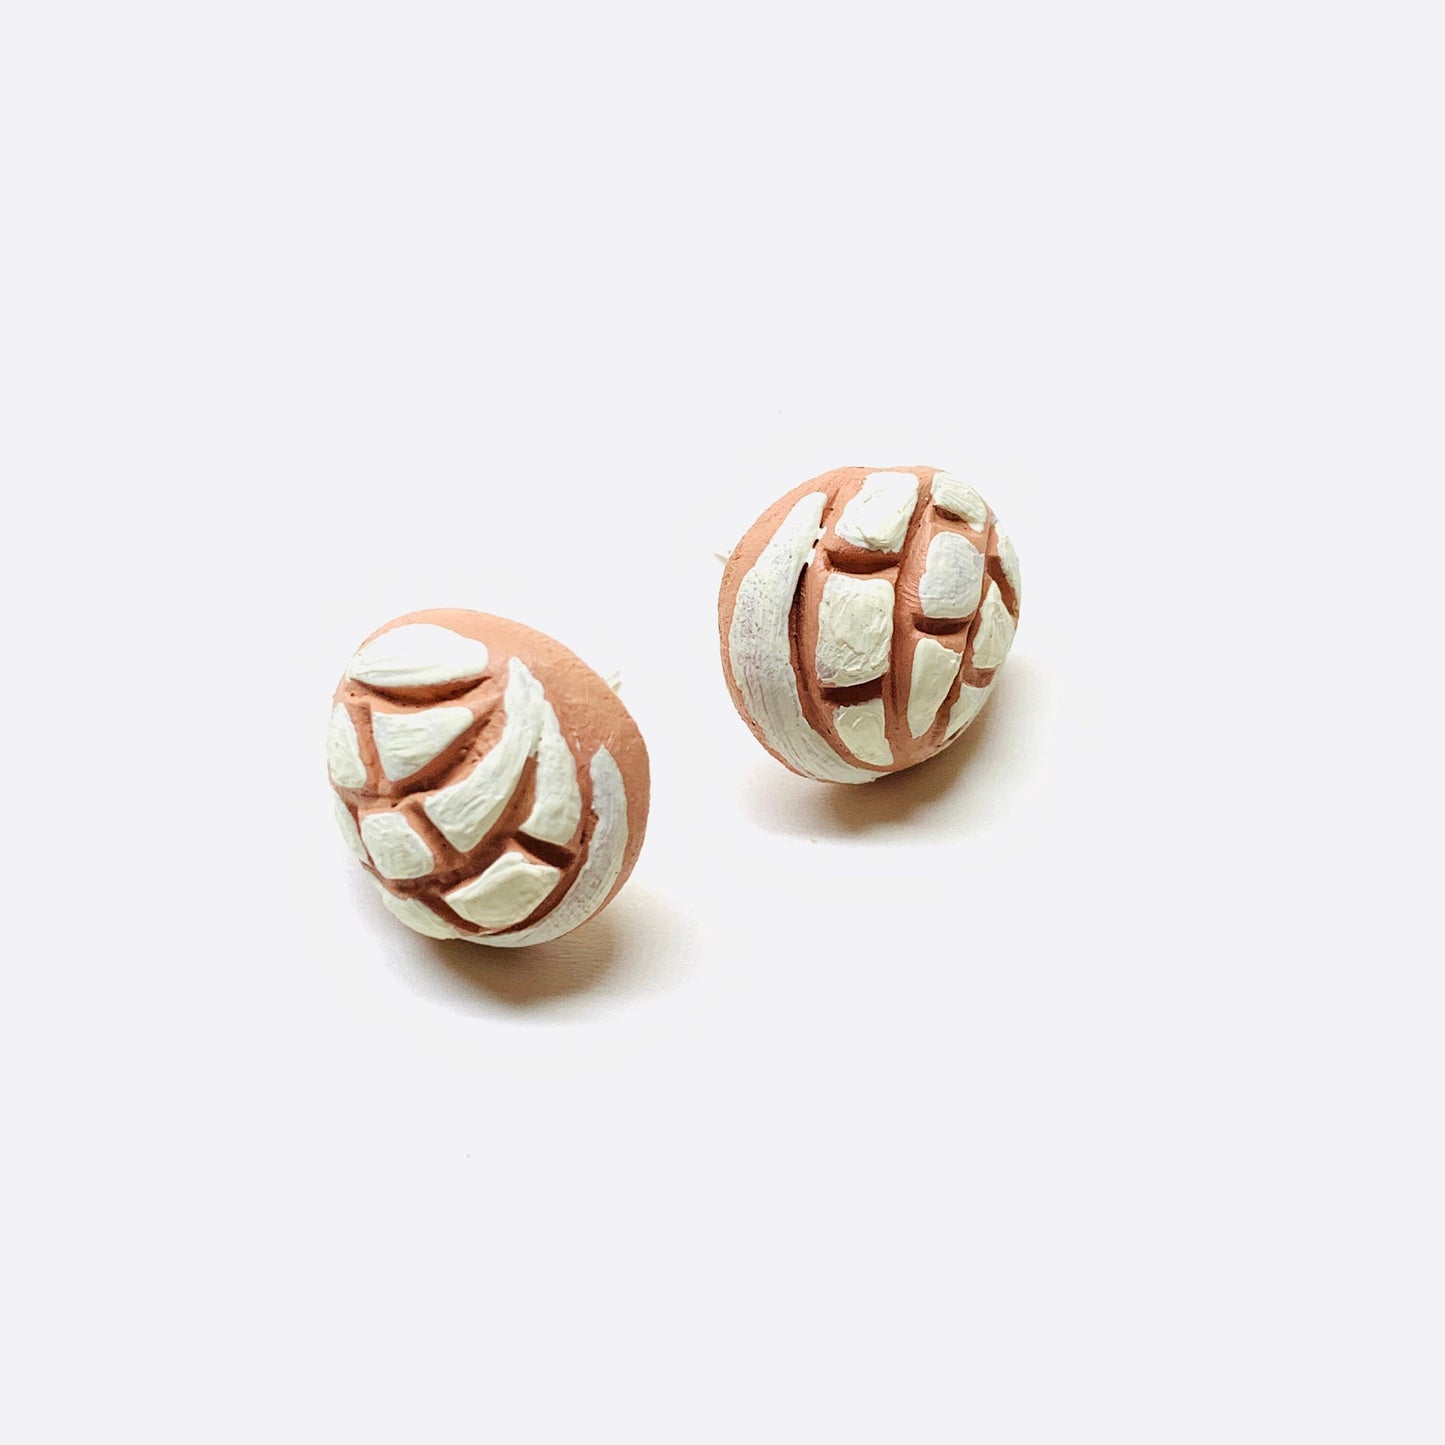 Pretty Mini Stud Concha Earrings Clay Jewelry Mexico Folk Art to Wear Lovingly Crafted Comfy Gift Girls Women Fashion Claywelry Aretes Mujer